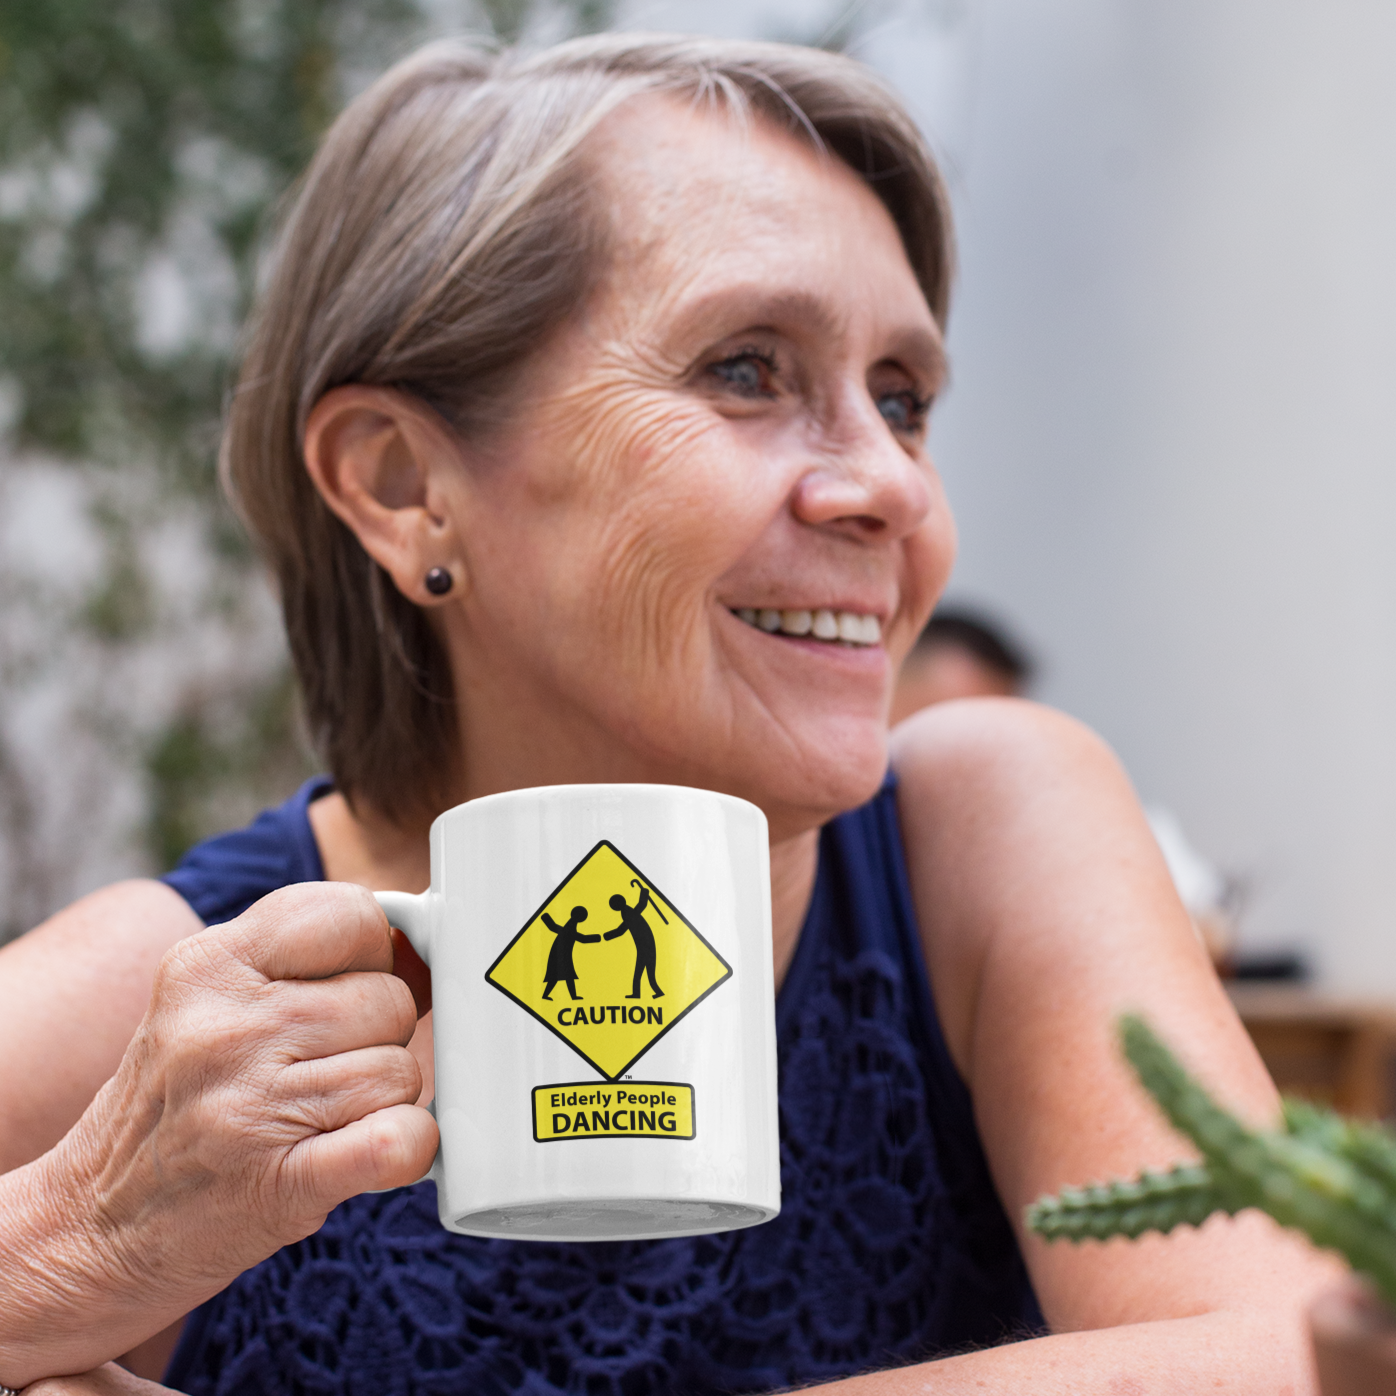 Mature woman holding a coffee cup that says "Caution: Elderly People DANCING"